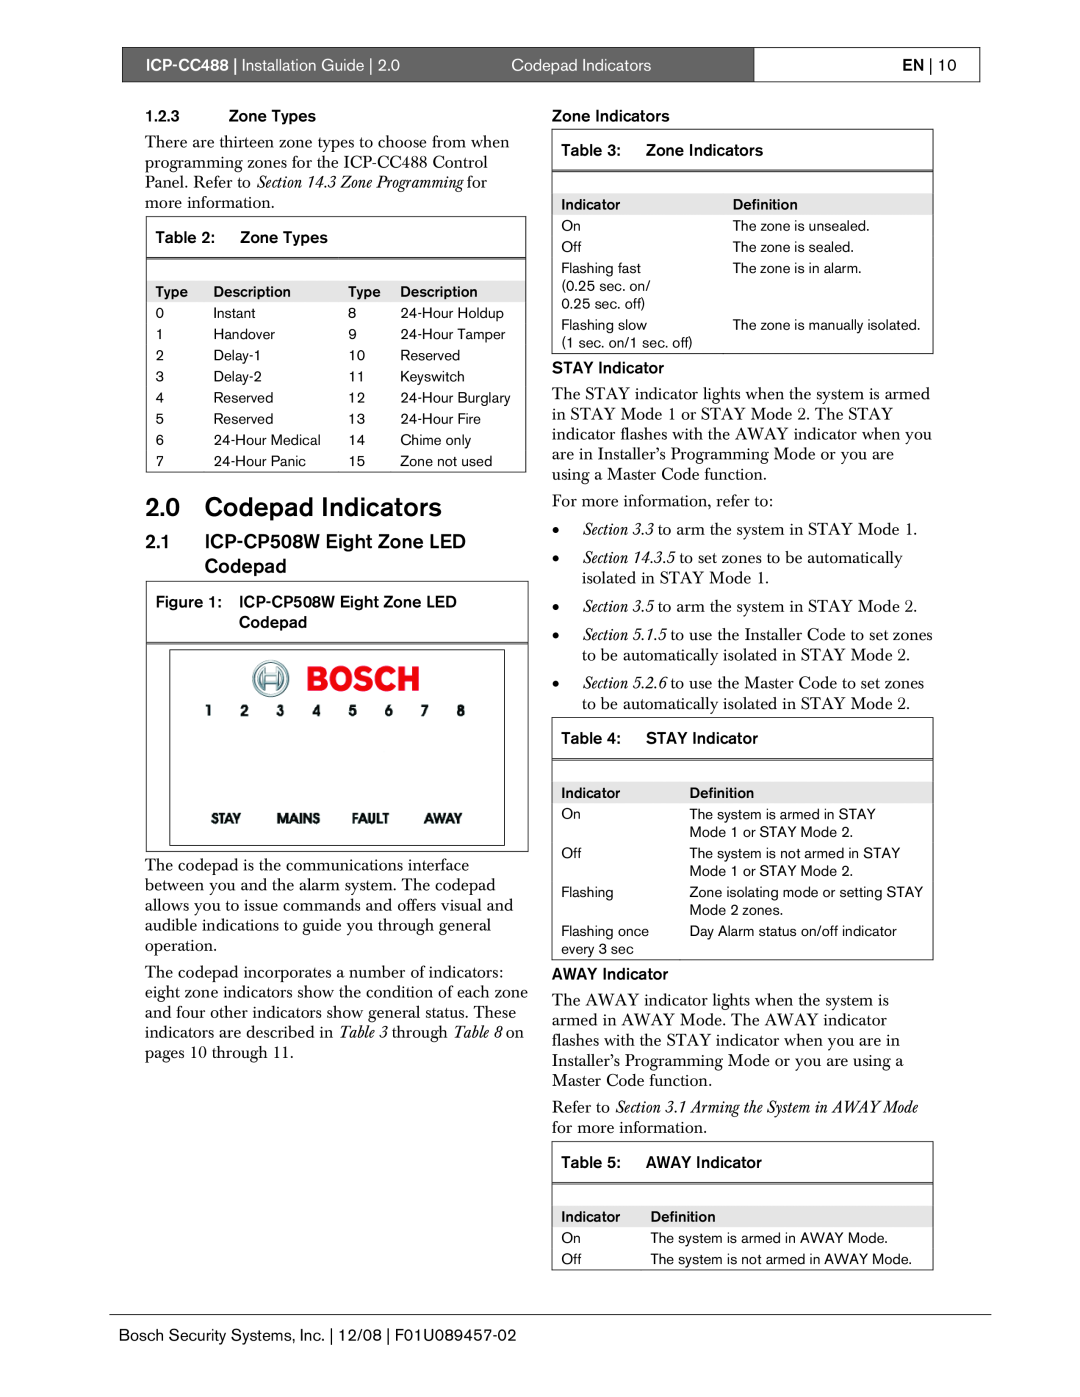 Bosch Appliances manual 2.0Codepad Indicators, 2.1ICP-CP508WEight Zone LED Codepad, ICP-CC488| Installation Guide 